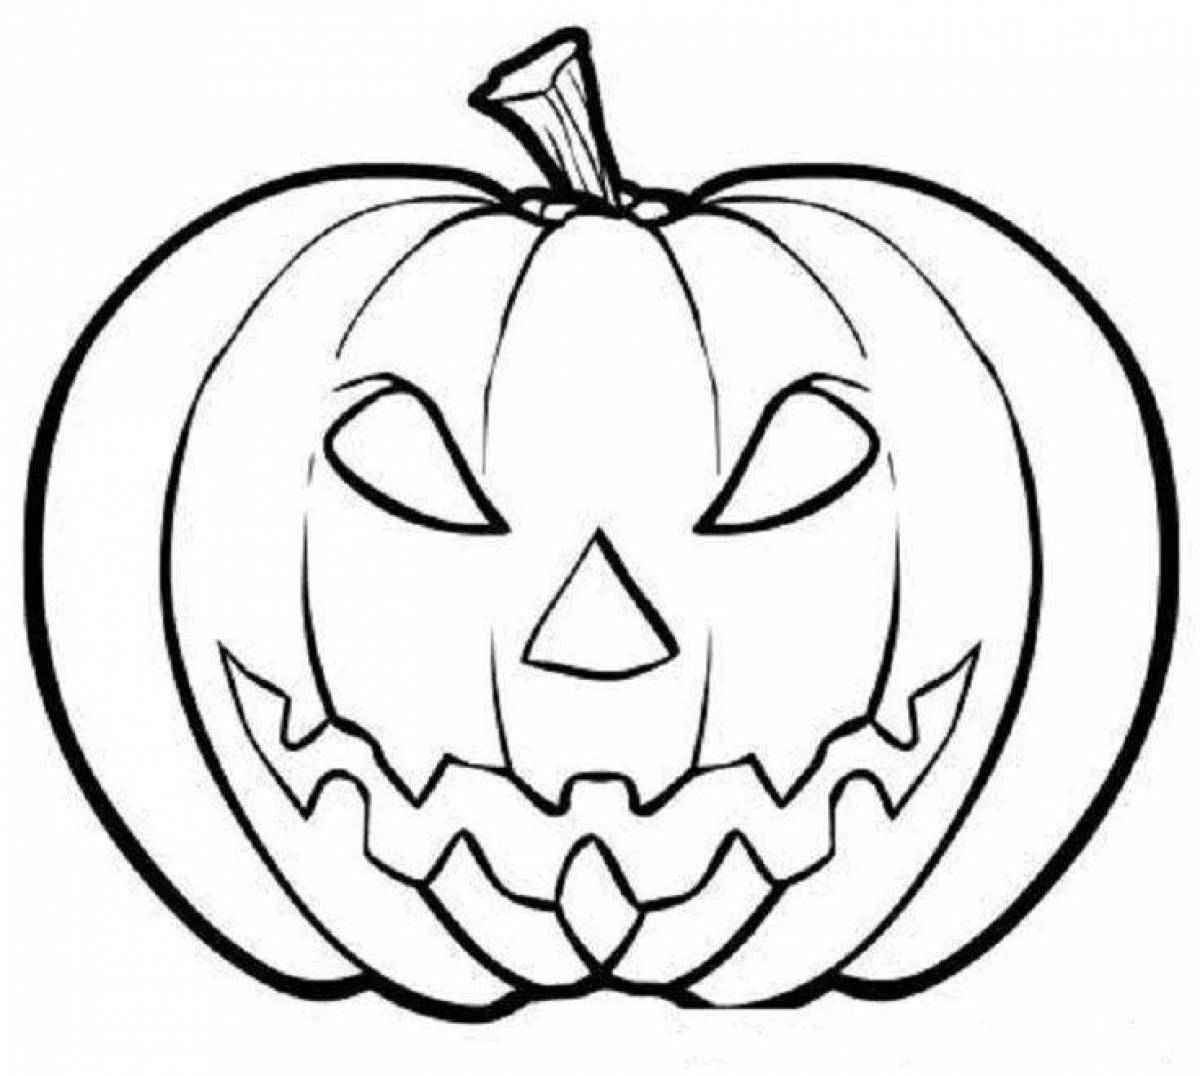 Chilling halloween pumpkin coloring page